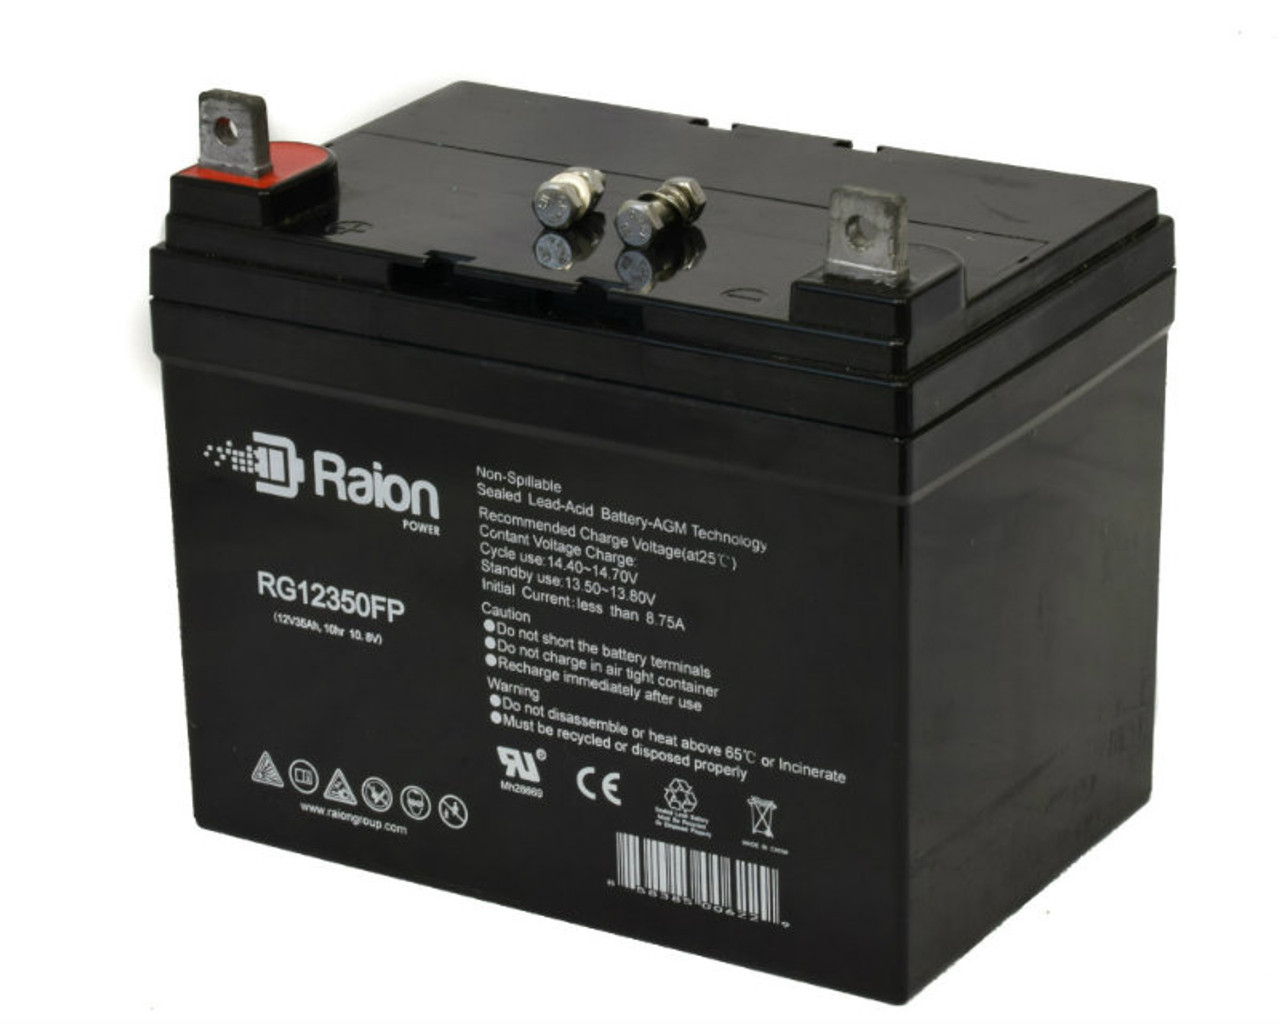 Raion Power Replacement 12V 35Ah RG12350FP Mobility Scooter Battery for Invacare Jaguar Power 9000